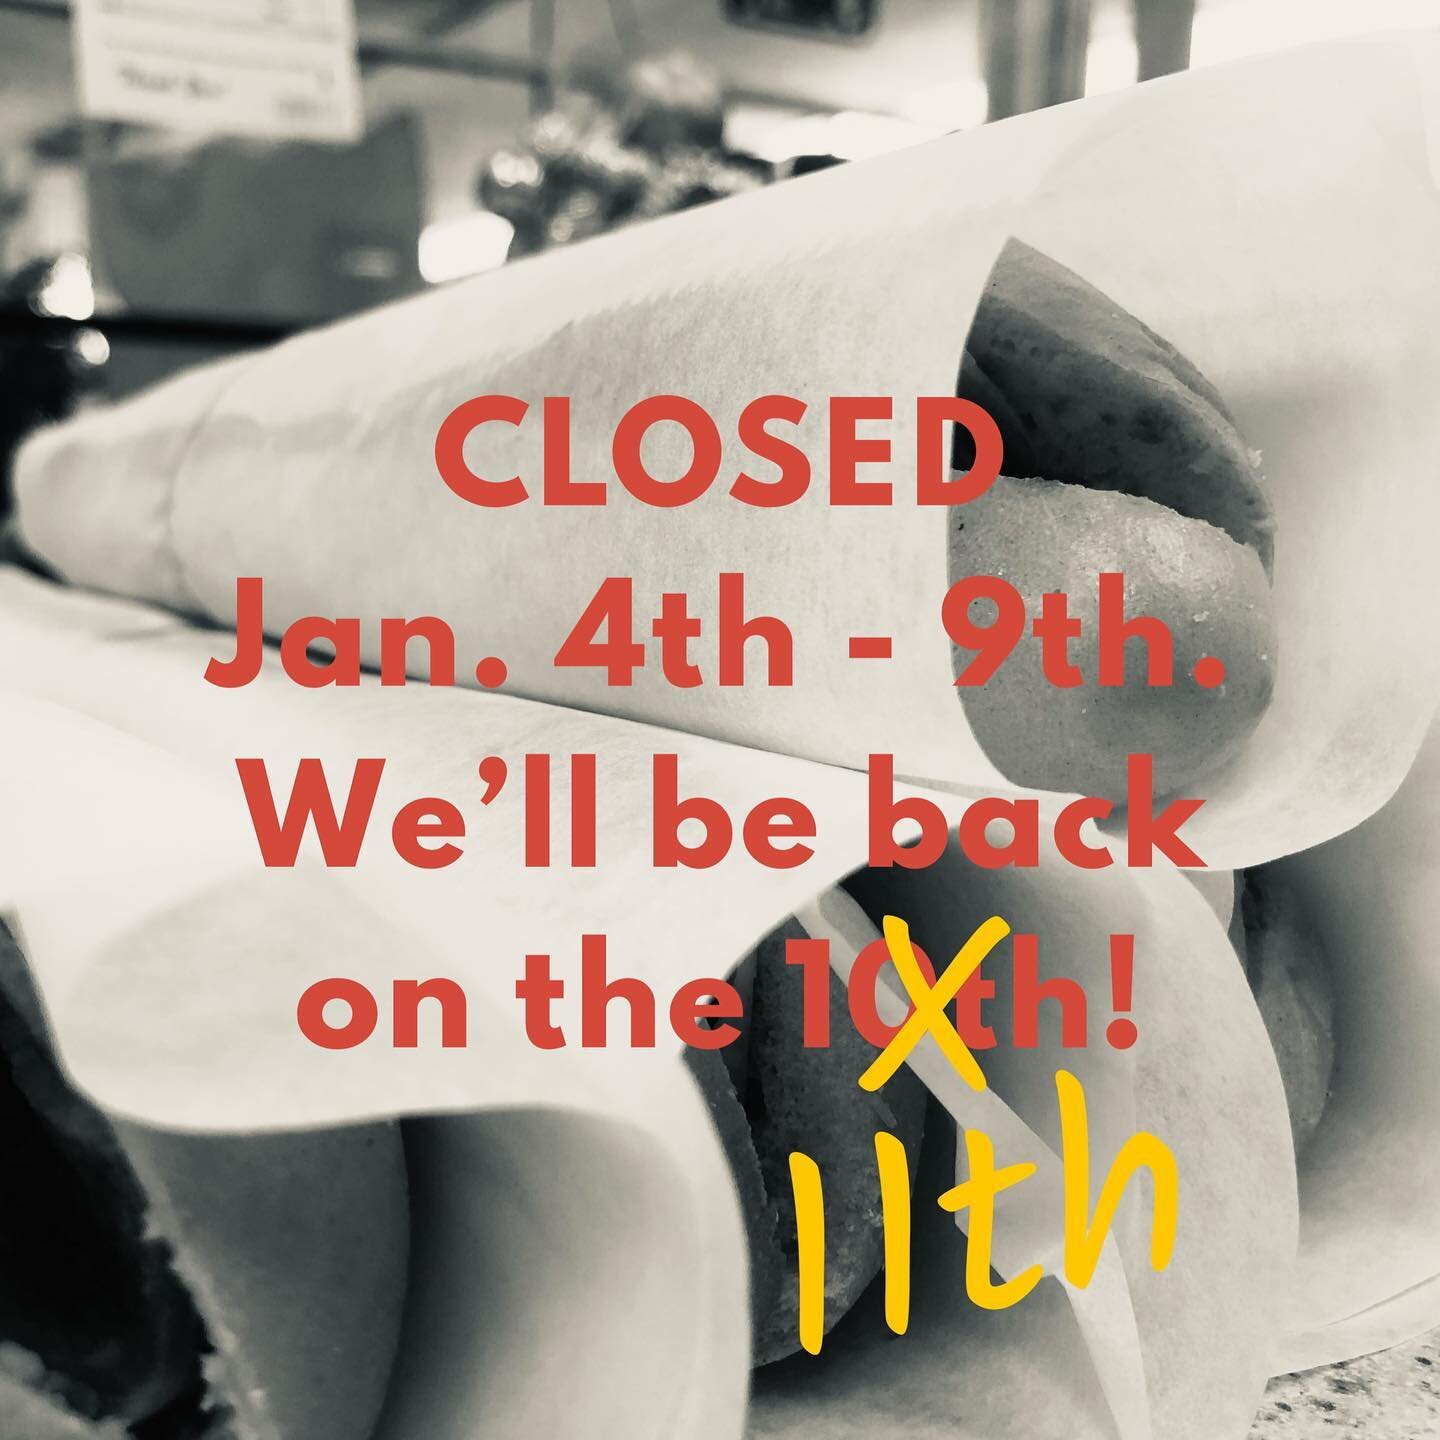 Sorry guys.... we made a mistake on our pervious post. We&rsquo;ll be back on Monday, the 11th. Our hours will temporarily be Thursday - Monday, 9-5... Closed Tuesday and Wednesday. Sorry for the inconvenience.